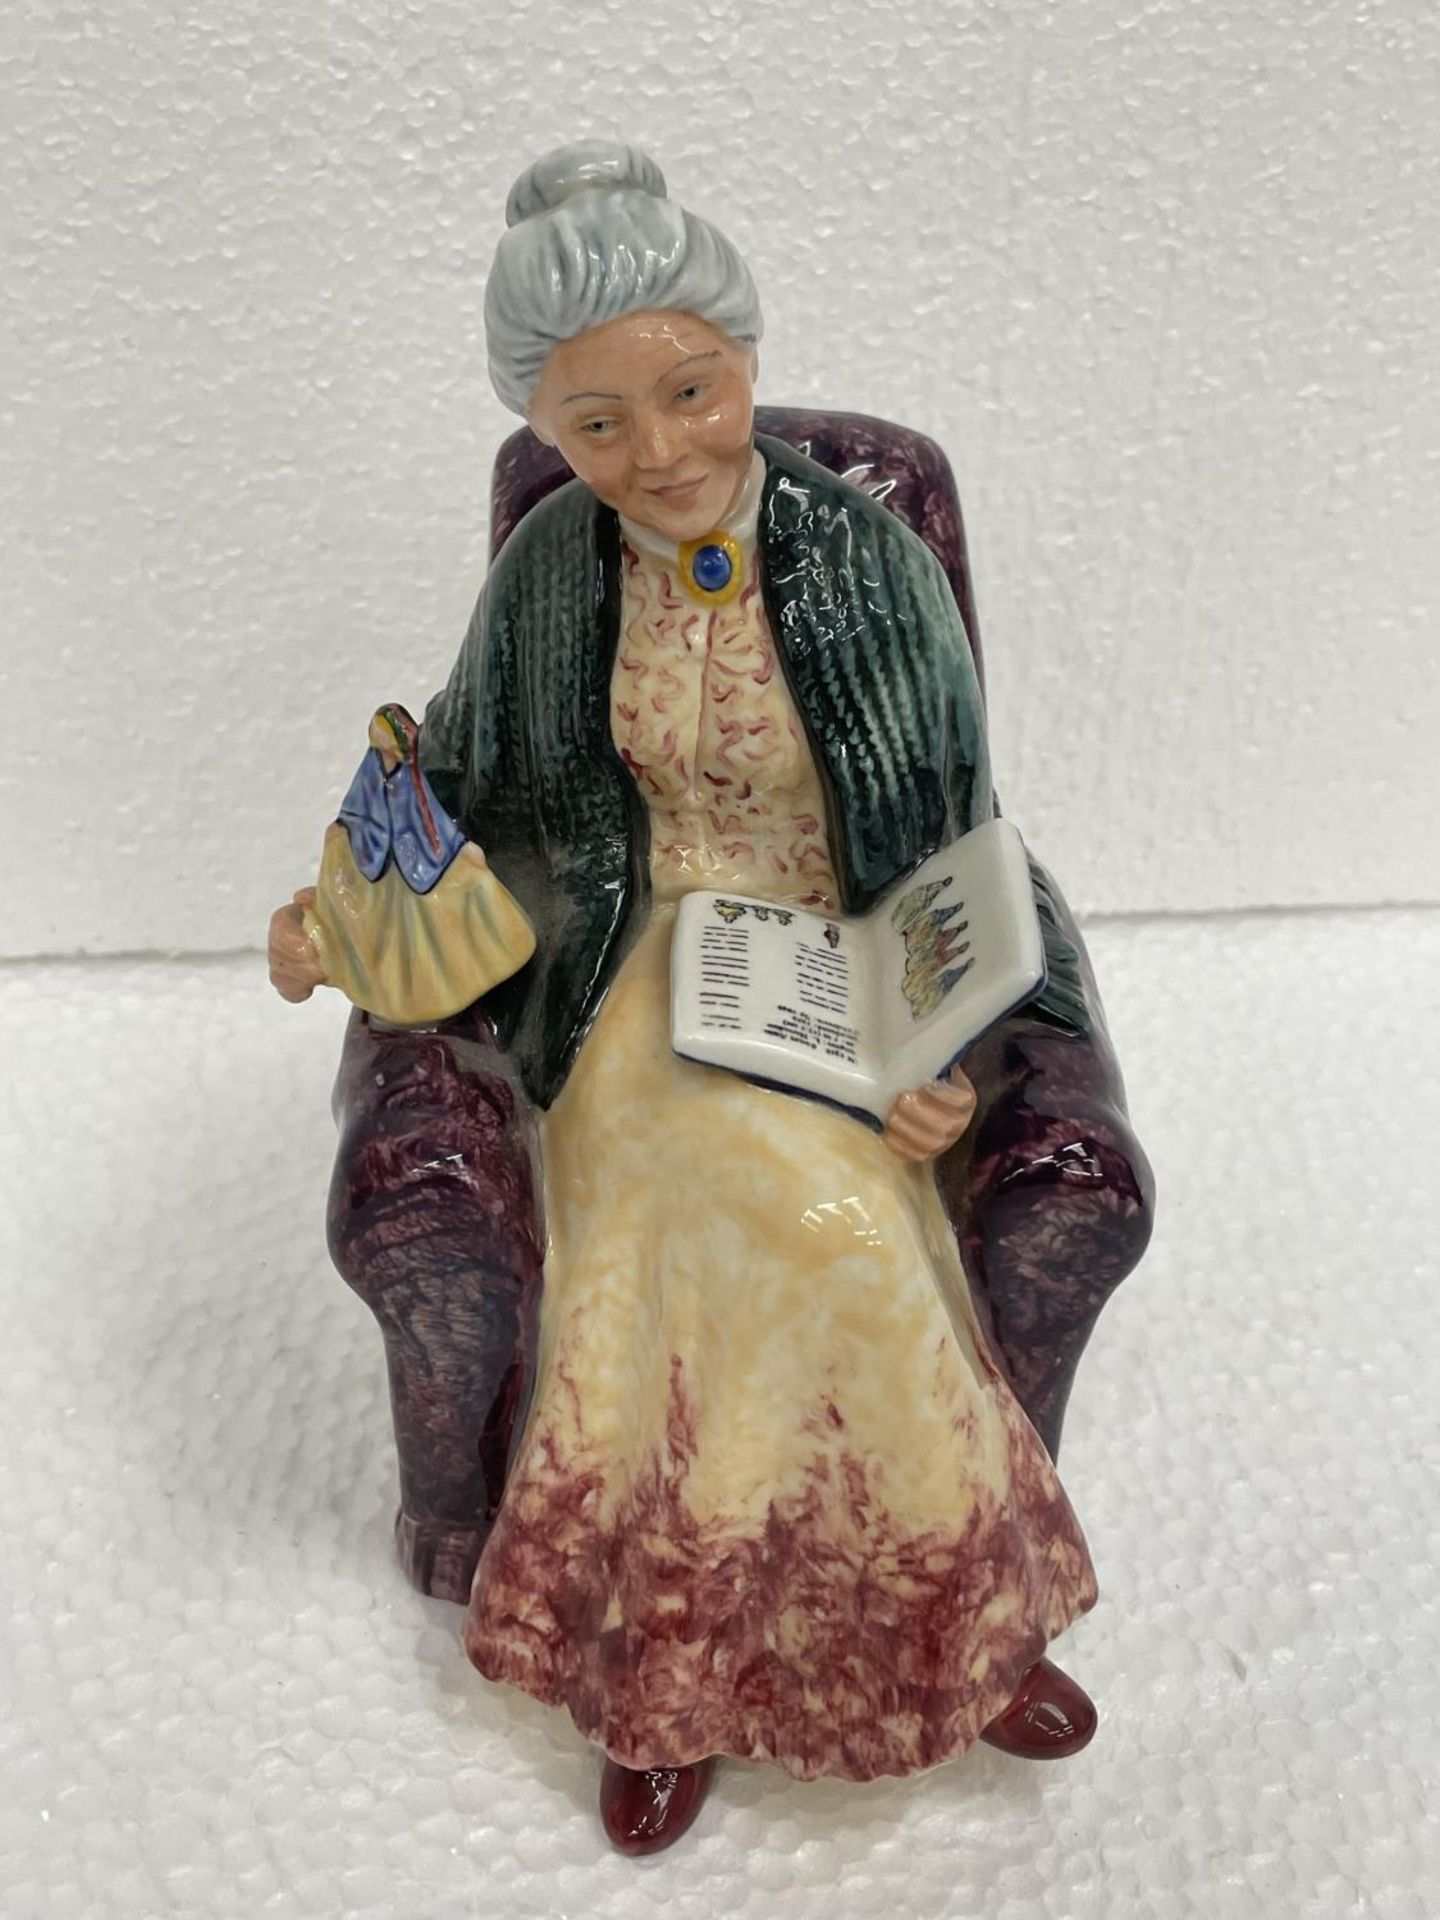 A ROYAL DOULTON FIGURE PRIZED POSSESSIONS HN2942 MADE EXCLUSIVELY FOR THE COLLECTORS CLUB